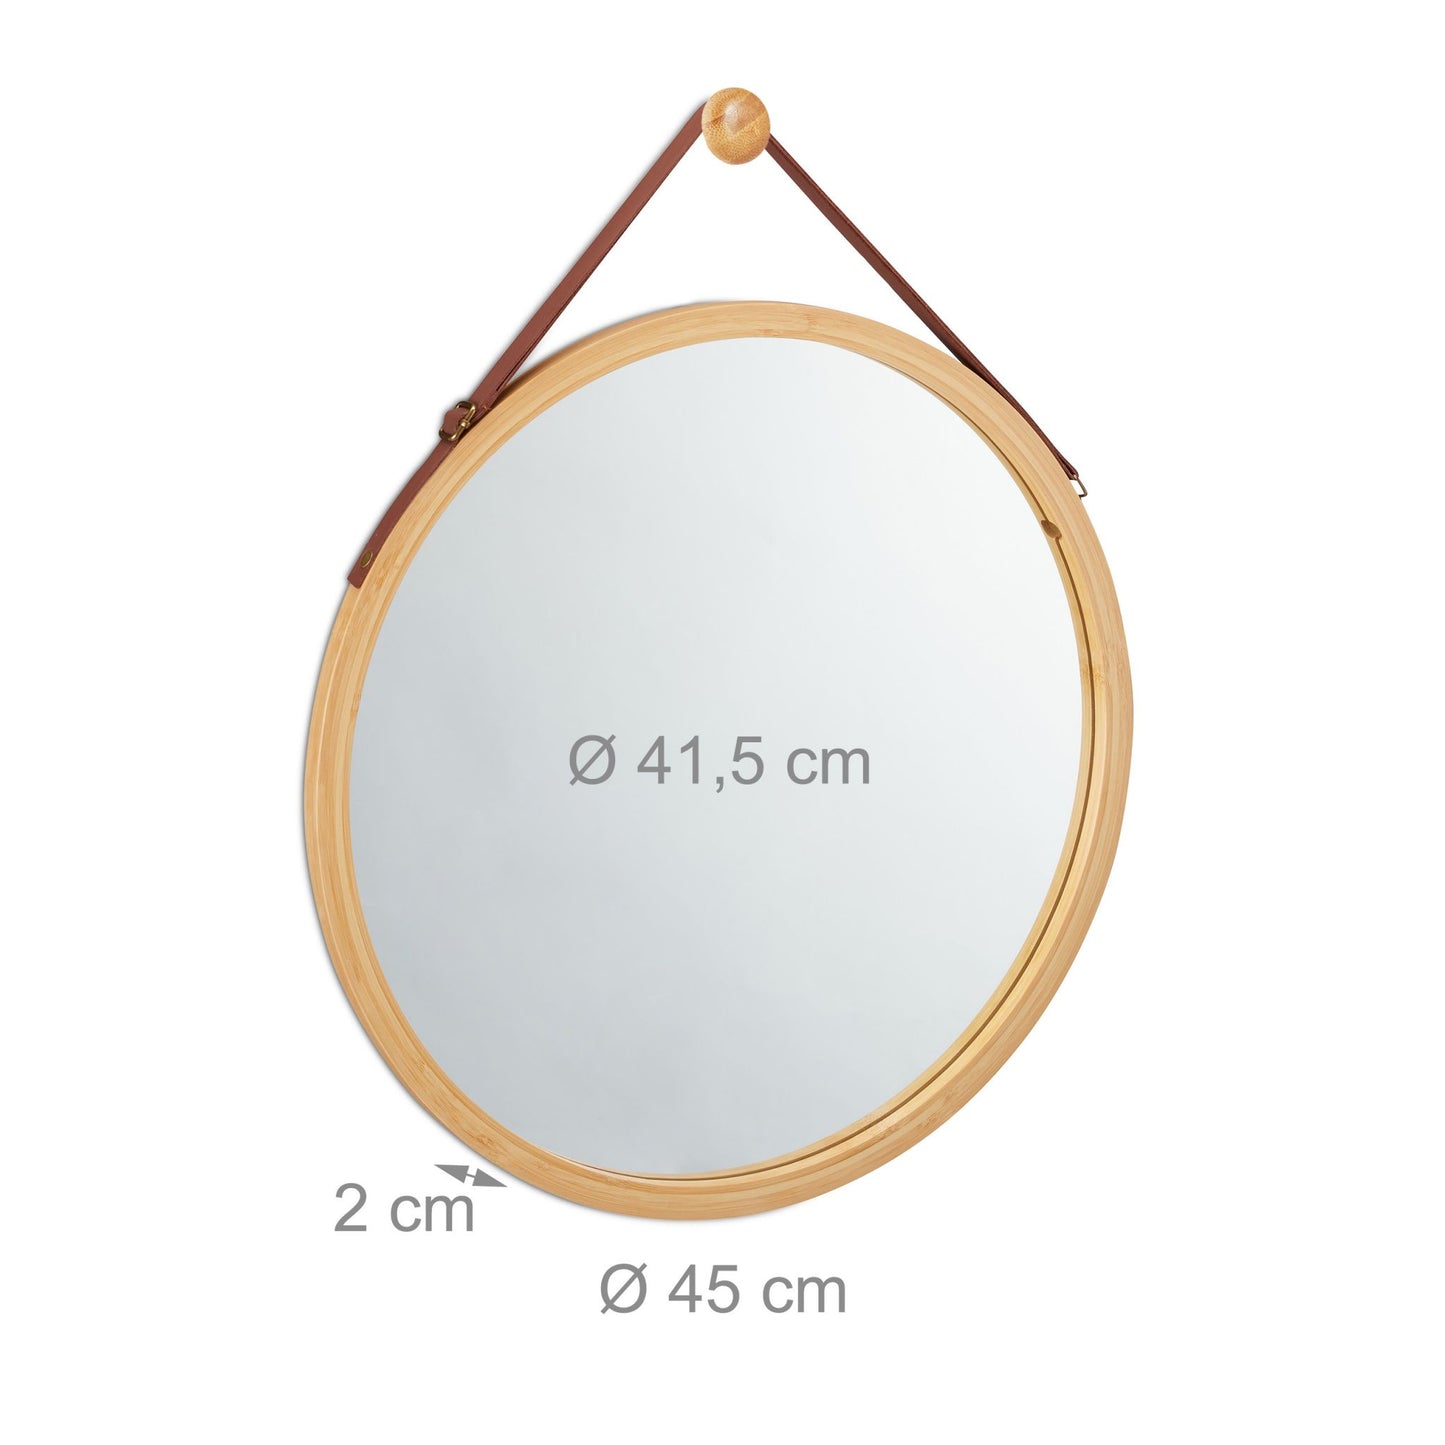 RelaxDays  Round Hanging Mirror with Bamboo Frame Bamboo Bathrooms